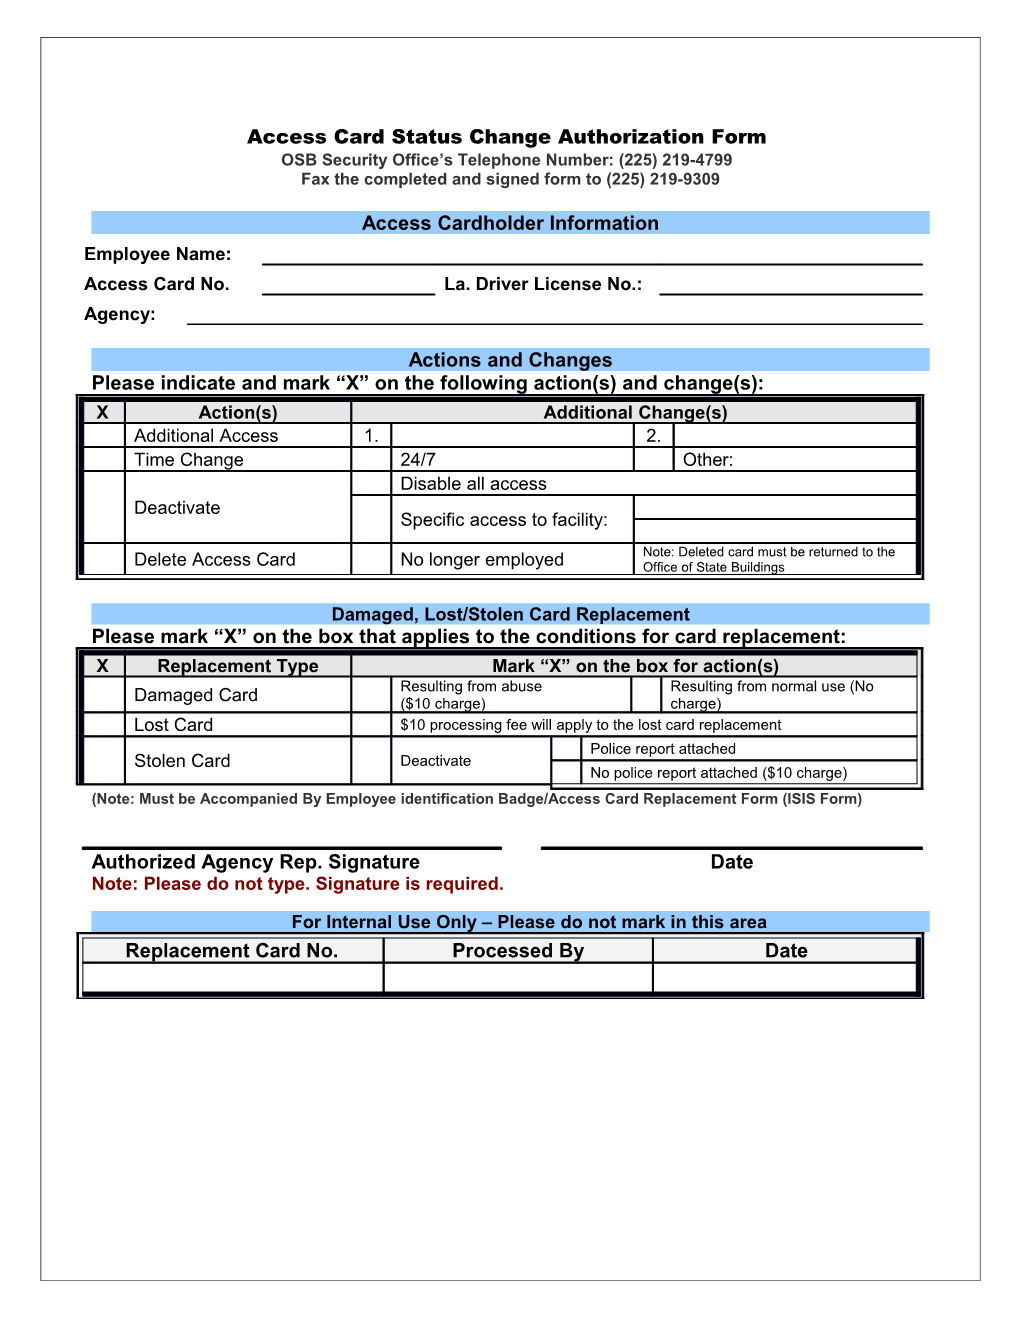 Employee Identification Badge/ Access Card Replacement Form